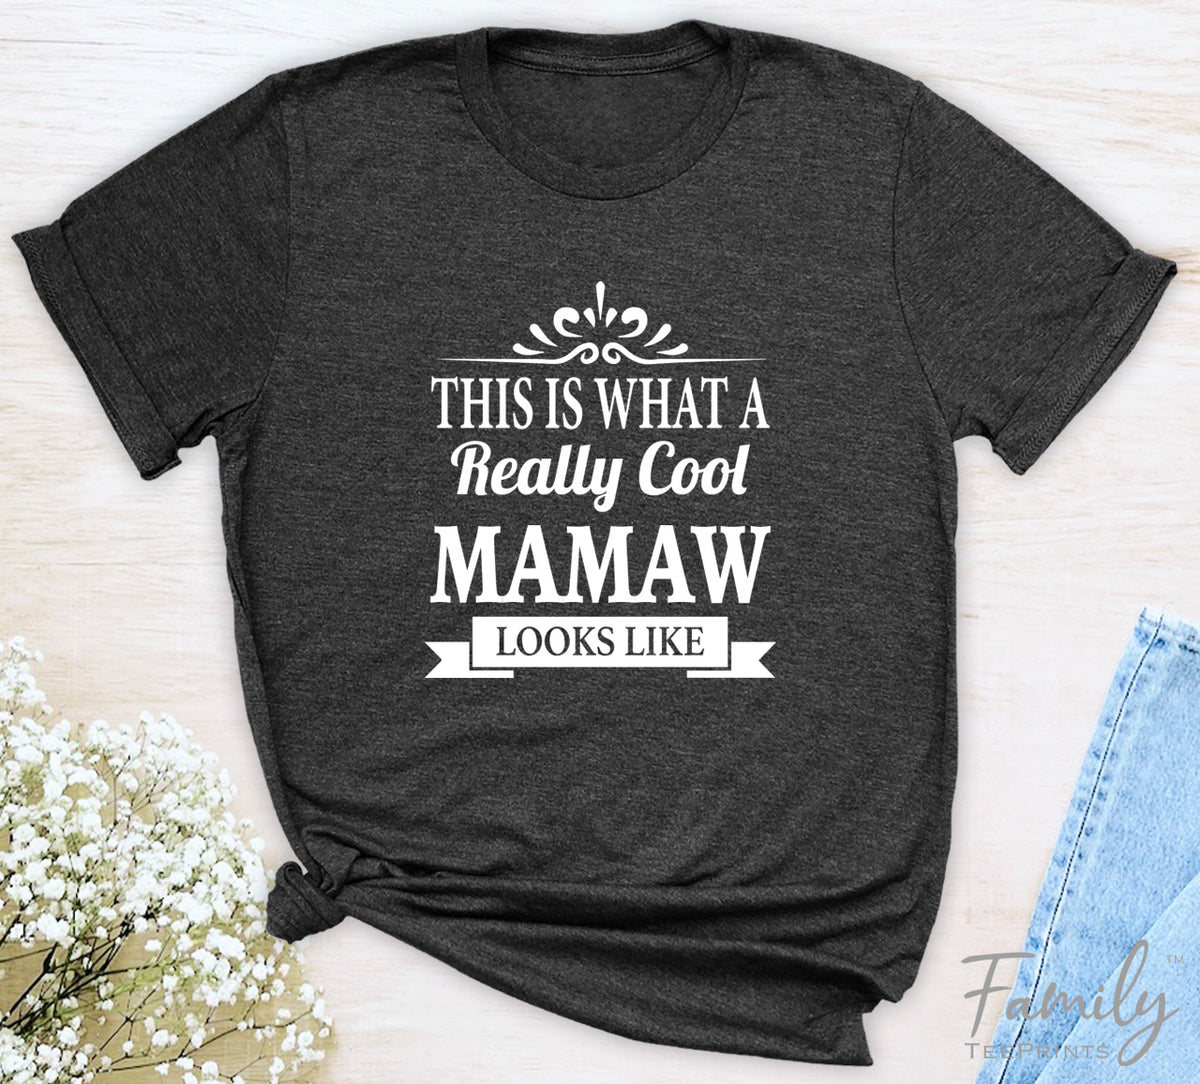 This Is What A Really Cool Mamaw Looks Like - Unisex T-shirt - Mamaw Shirt - Gift For Mamaw - familyteeprints